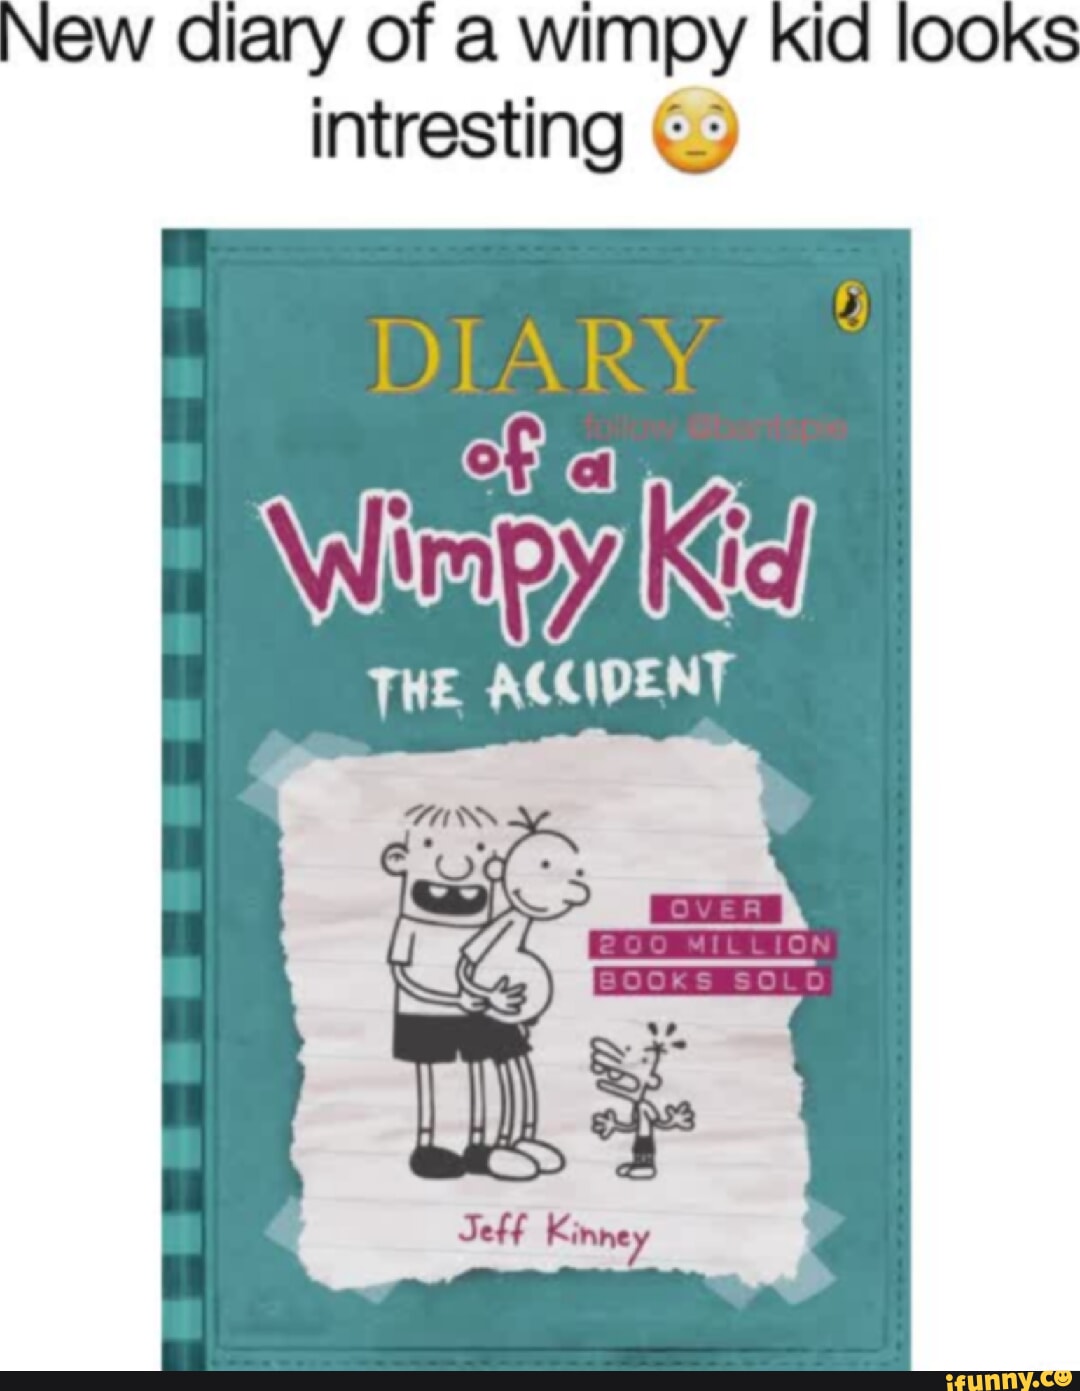 New diary of a wimpy kid looks intresting Wwimpya Kid THE ACCIDENT